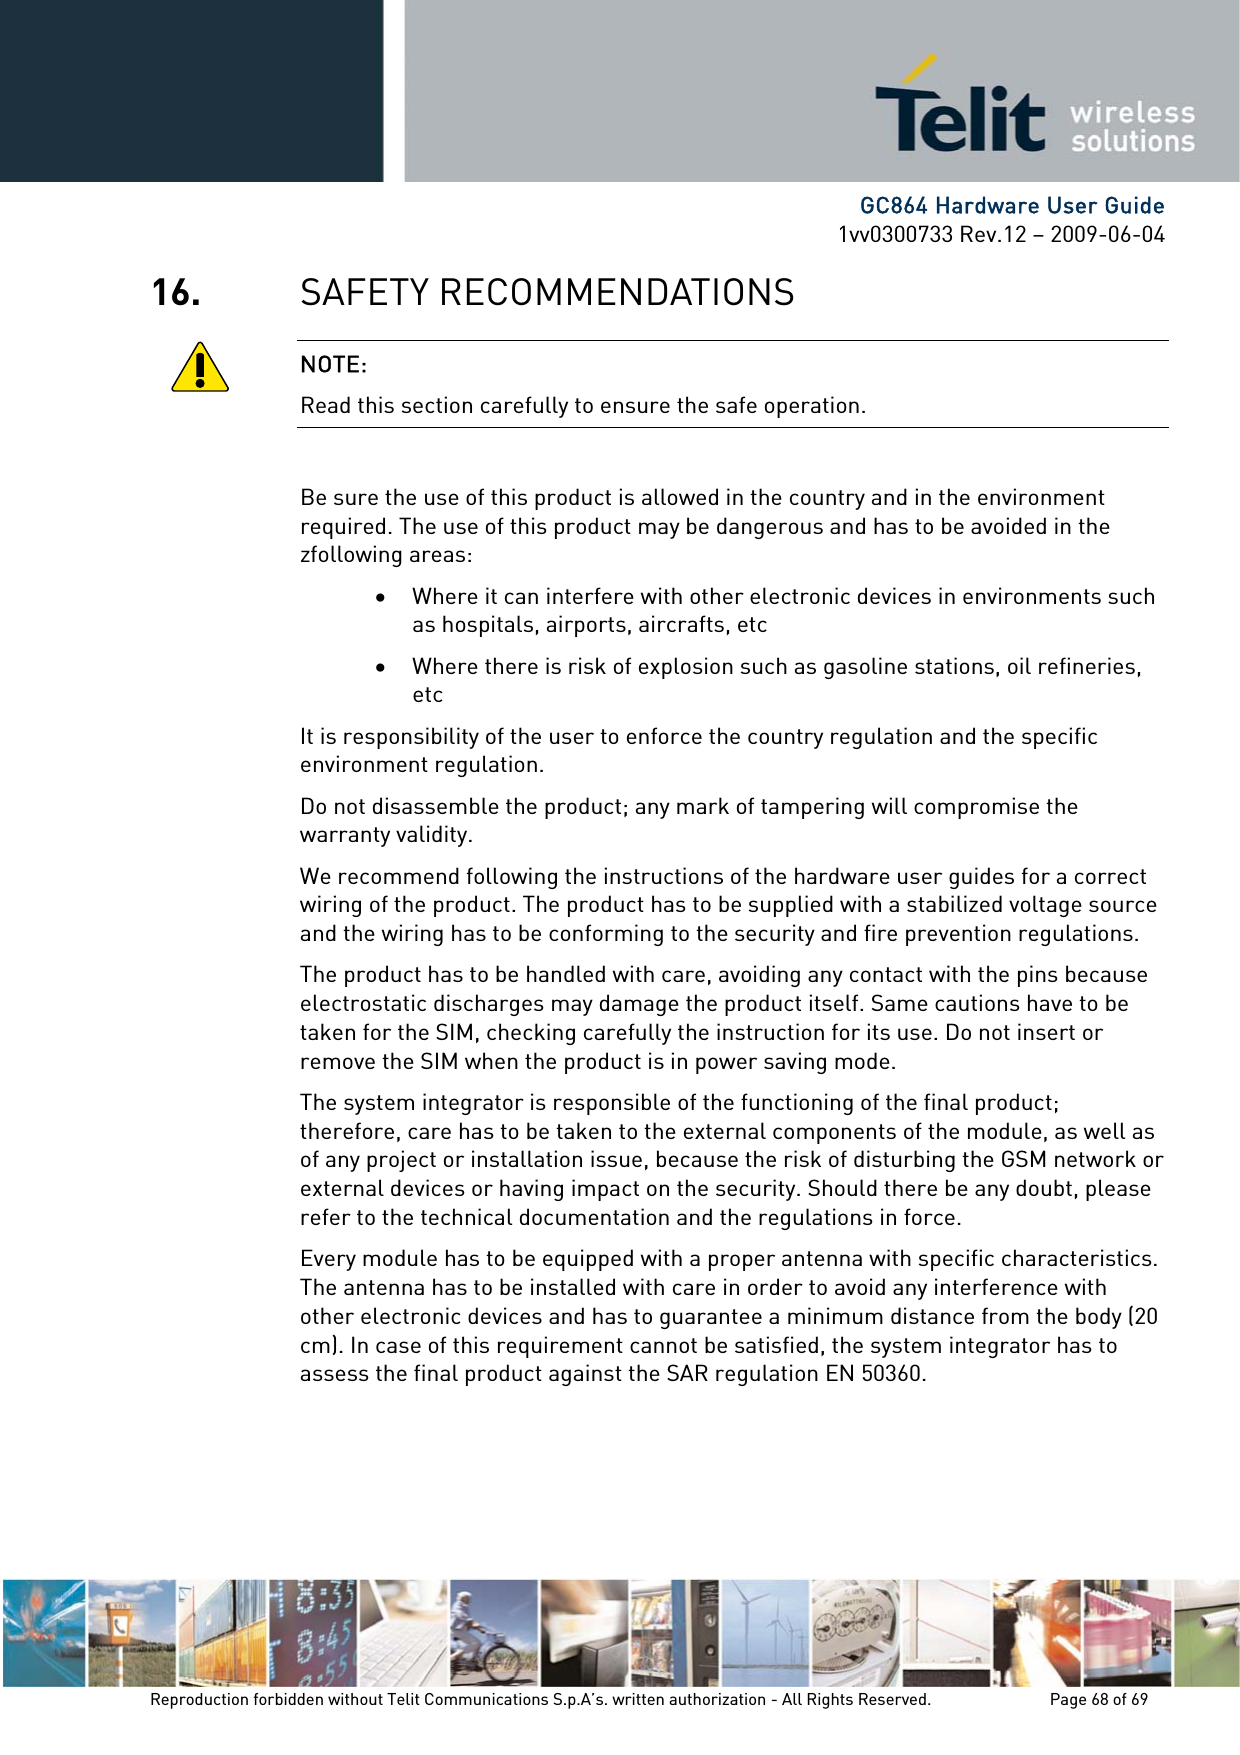      GC864 Hardware User Guide 1vv0300733 Rev.12 – 2009-06-04 16. SAFETY RECOMMENDATIONS NOTE: Read this section carefully to ensure the safe operation.  Be sure the use of this product is allowed in the country and in the environment required. The use of this product may be dangerous and has to be avoided in the zfollowing areas: • Where it can interfere with other electronic devices in environments such as hospitals, airports, aircrafts, etc • Where there is risk of explosion such as gasoline stations, oil refineries, etc  It is responsibility of the user to enforce the country regulation and the specific environment regulation. Do not disassemble the product; any mark of tampering will compromise the warranty validity. We recommend following the instructions of the hardware user guides for a correct wiring of the product. The product has to be supplied with a stabilized voltage source and the wiring has to be conforming to the security and fire prevention regulations. The product has to be handled with care, avoiding any contact with the pins because electrostatic discharges may damage the product itself. Same cautions have to be taken for the SIM, checking carefully the instruction for its use. Do not insert or remove the SIM when the product is in power saving mode. The system integrator is responsible of the functioning of the final product; therefore, care has to be taken to the external components of the module, as well as of any project or installation issue, because the risk of disturbing the GSM network or external devices or having impact on the security. Should there be any doubt, please refer to the technical documentation and the regulations in force. Every module has to be equipped with a proper antenna with specific characteristics. The antenna has to be installed with care in order to avoid any interference with other electronic devices and has to guarantee a minimum distance from the body (20 cm). In case of this requirement cannot be satisfied, the system integrator has to assess the final product against the SAR regulation EN 50360.   Reproduction forbidden without Telit Communications S.p.A’s. written authorization - All Rights Reserved.    Page 68 of 69  